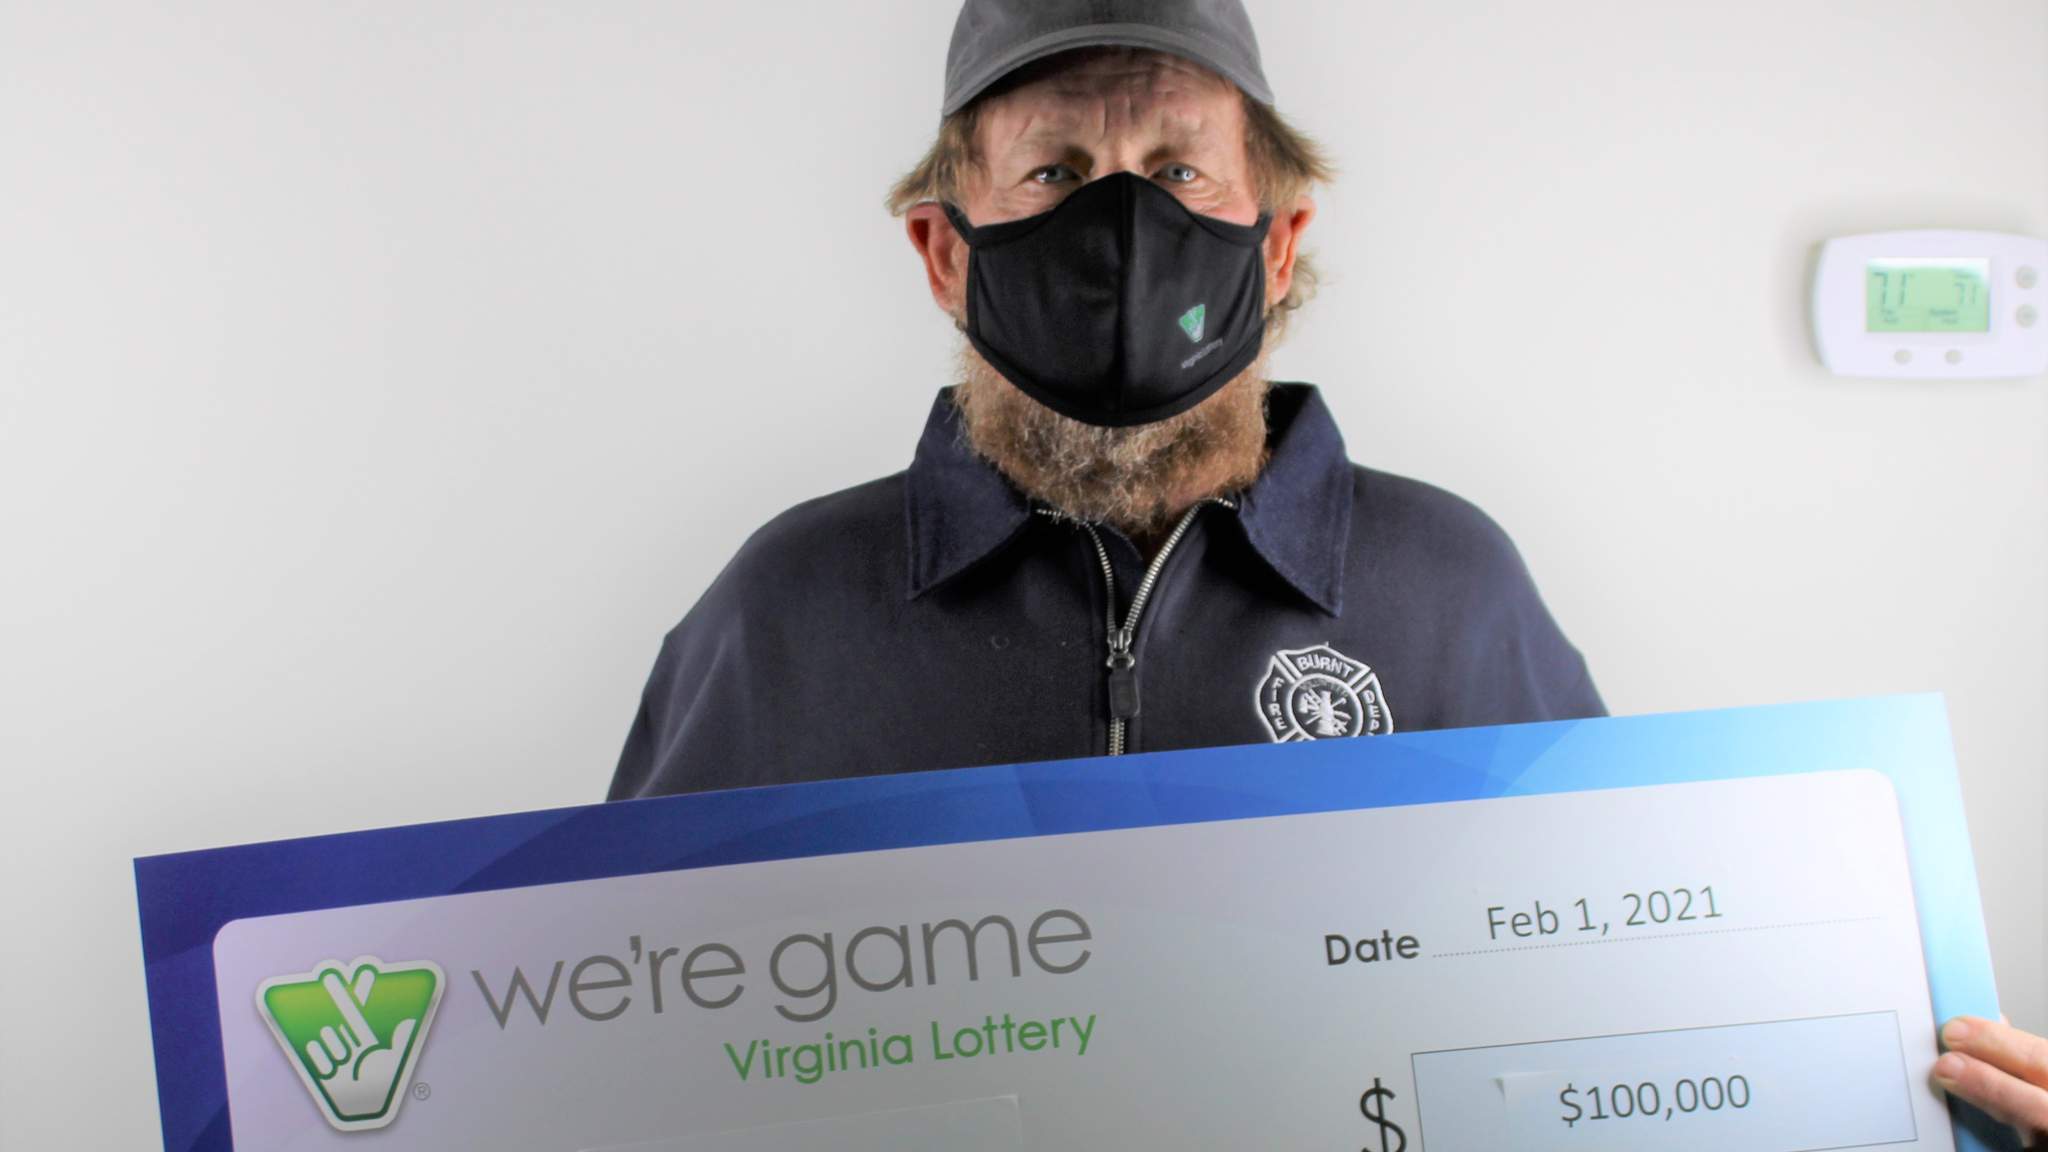 Franklin County man wins $100,000 from Virginia Lottery scratch off